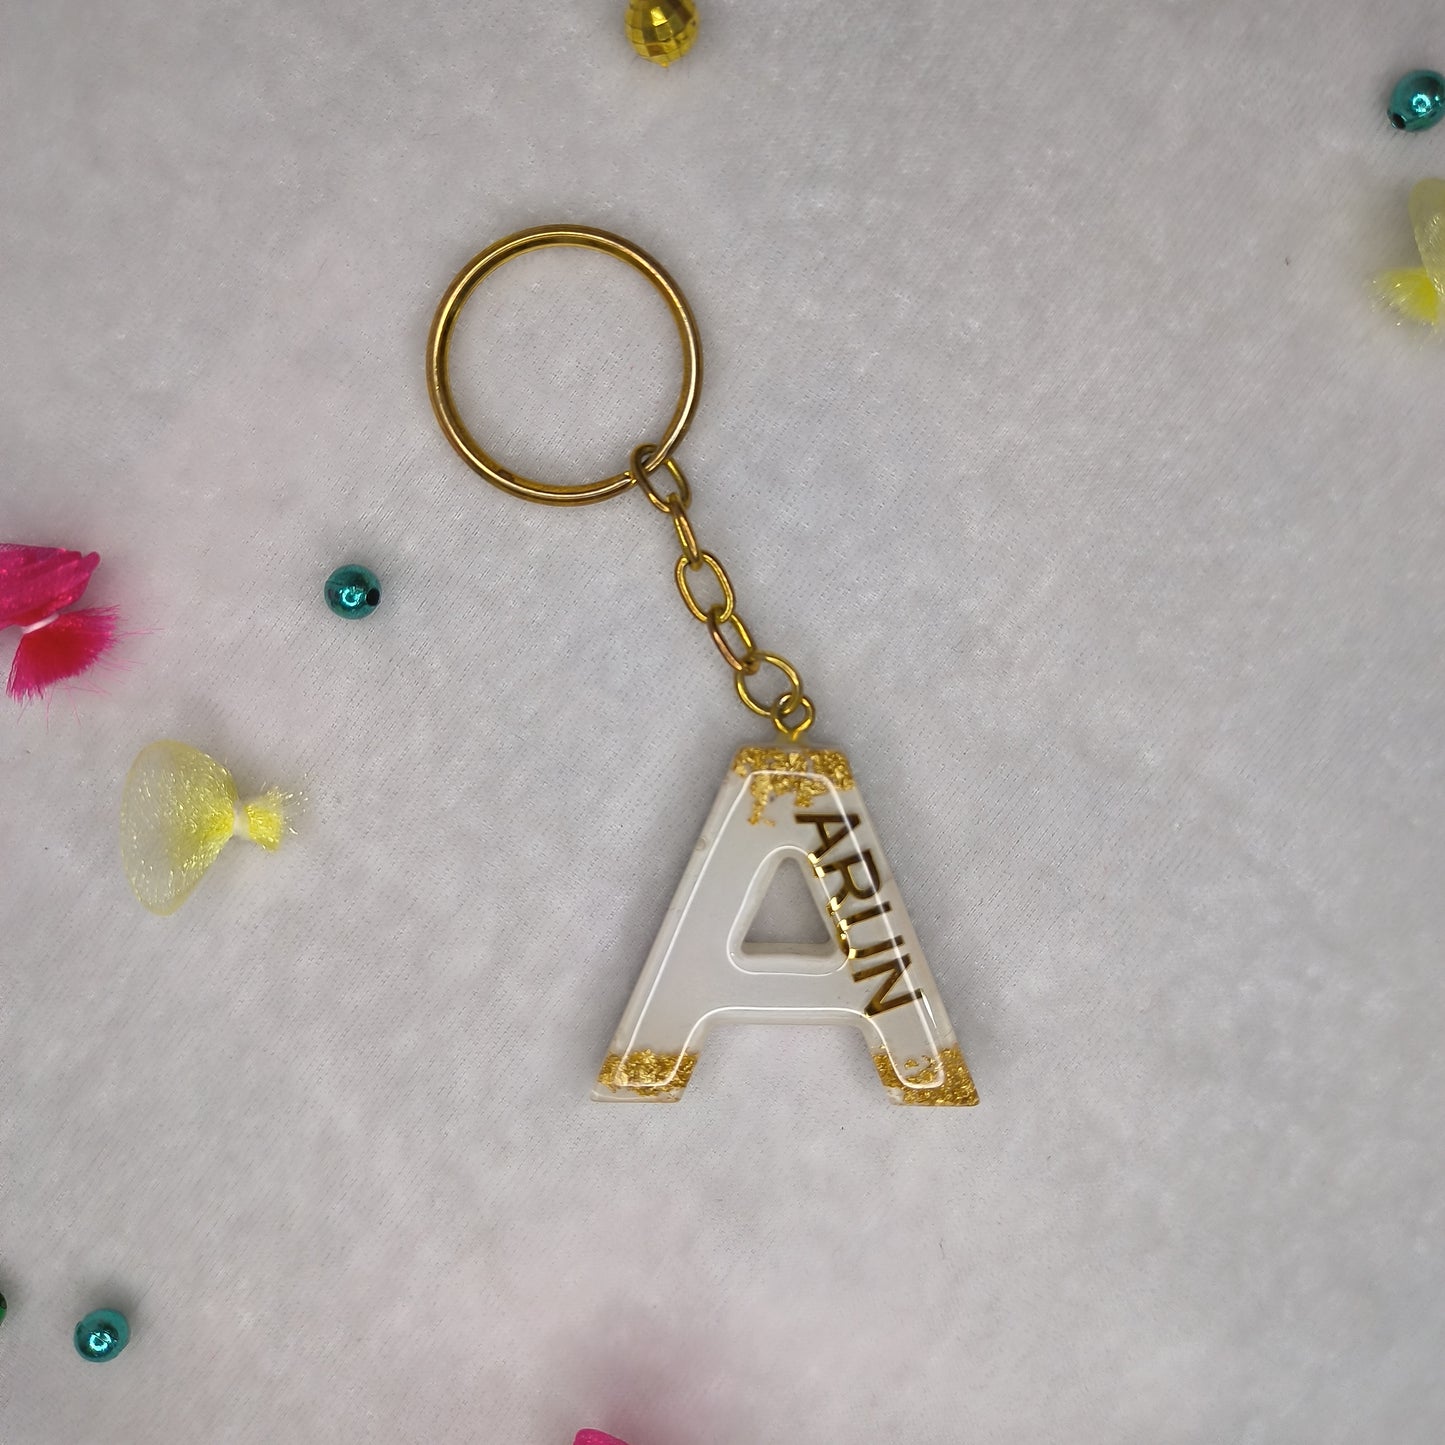 Personalized White Resin Keychains With A Initials